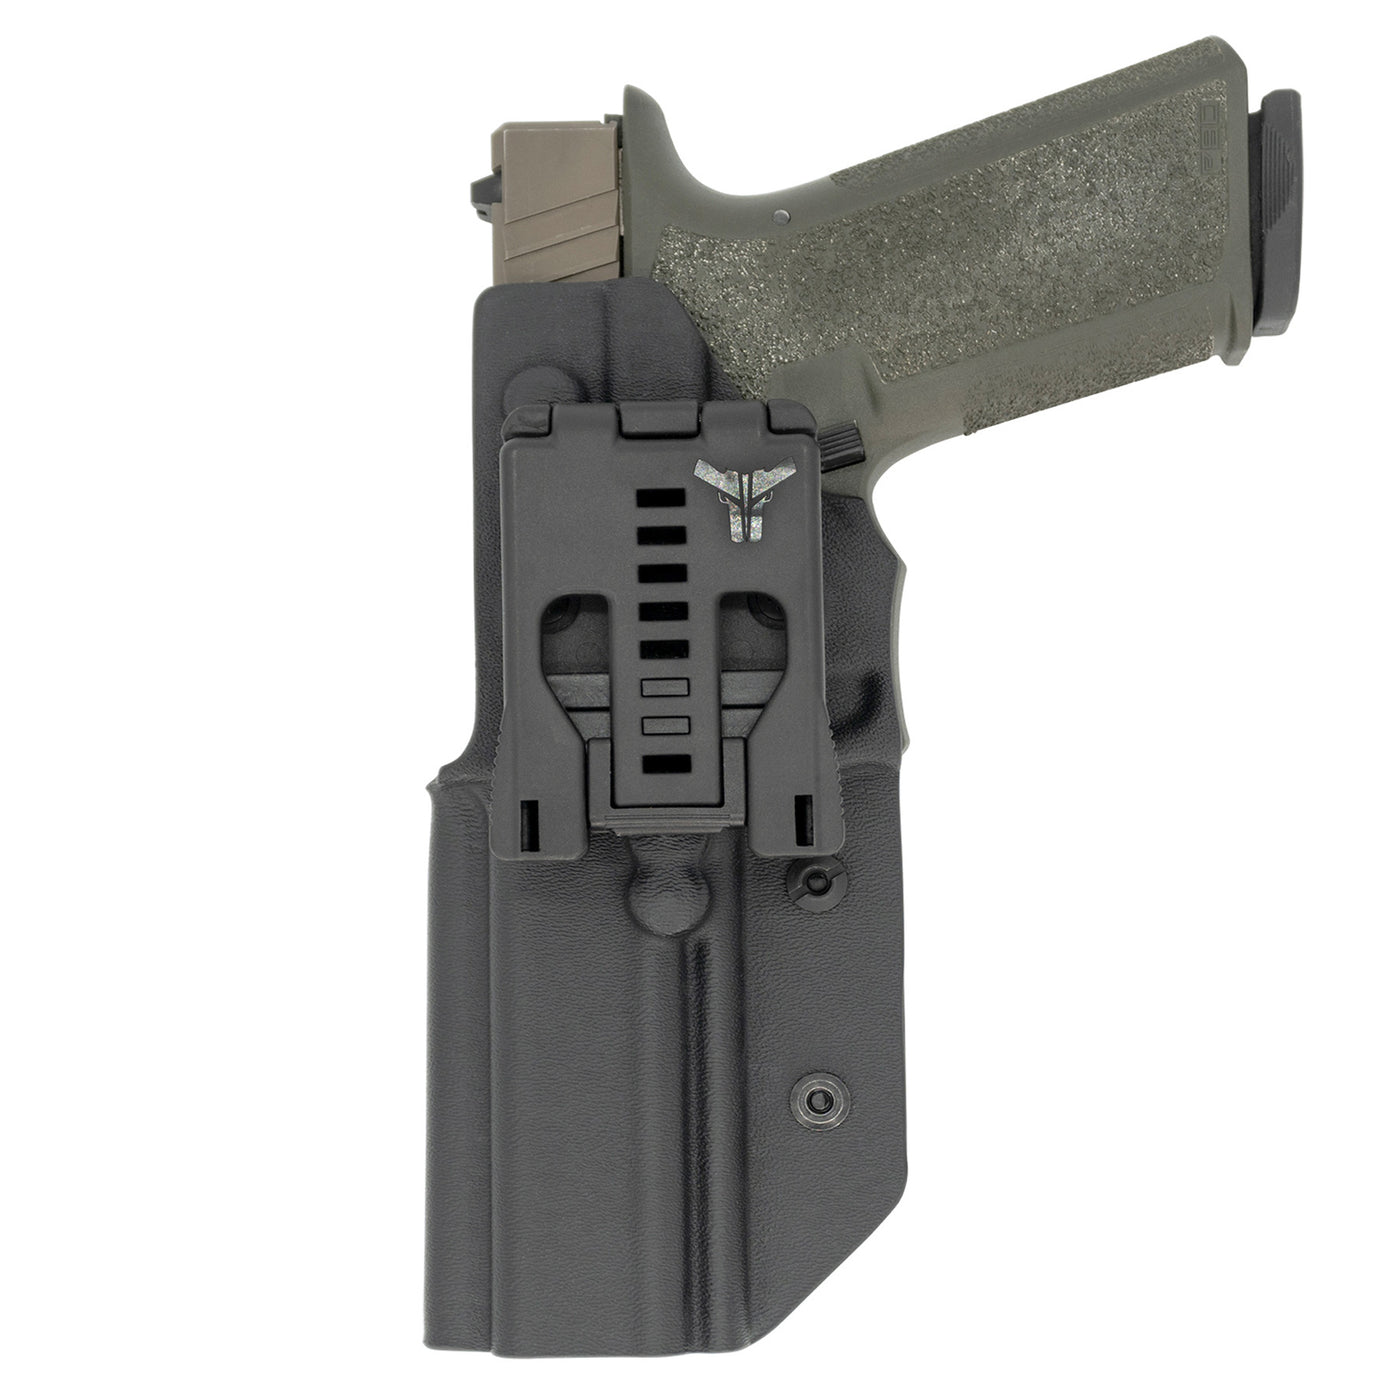 This is the rear of the C&G Holsters USPSA and IDPA holster for the Polymer80 PF940V2. Glock 34 length slide.